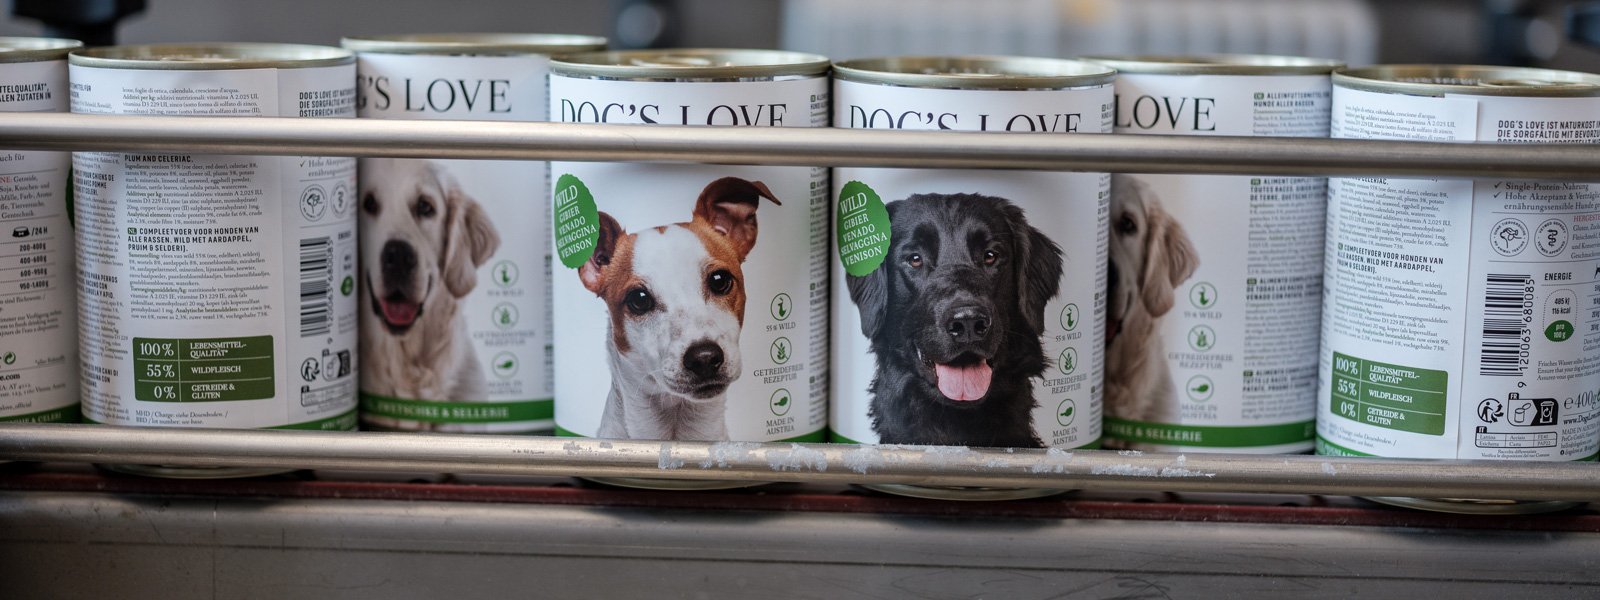 DOG'S LOVE cans running along a treadmill in the factory